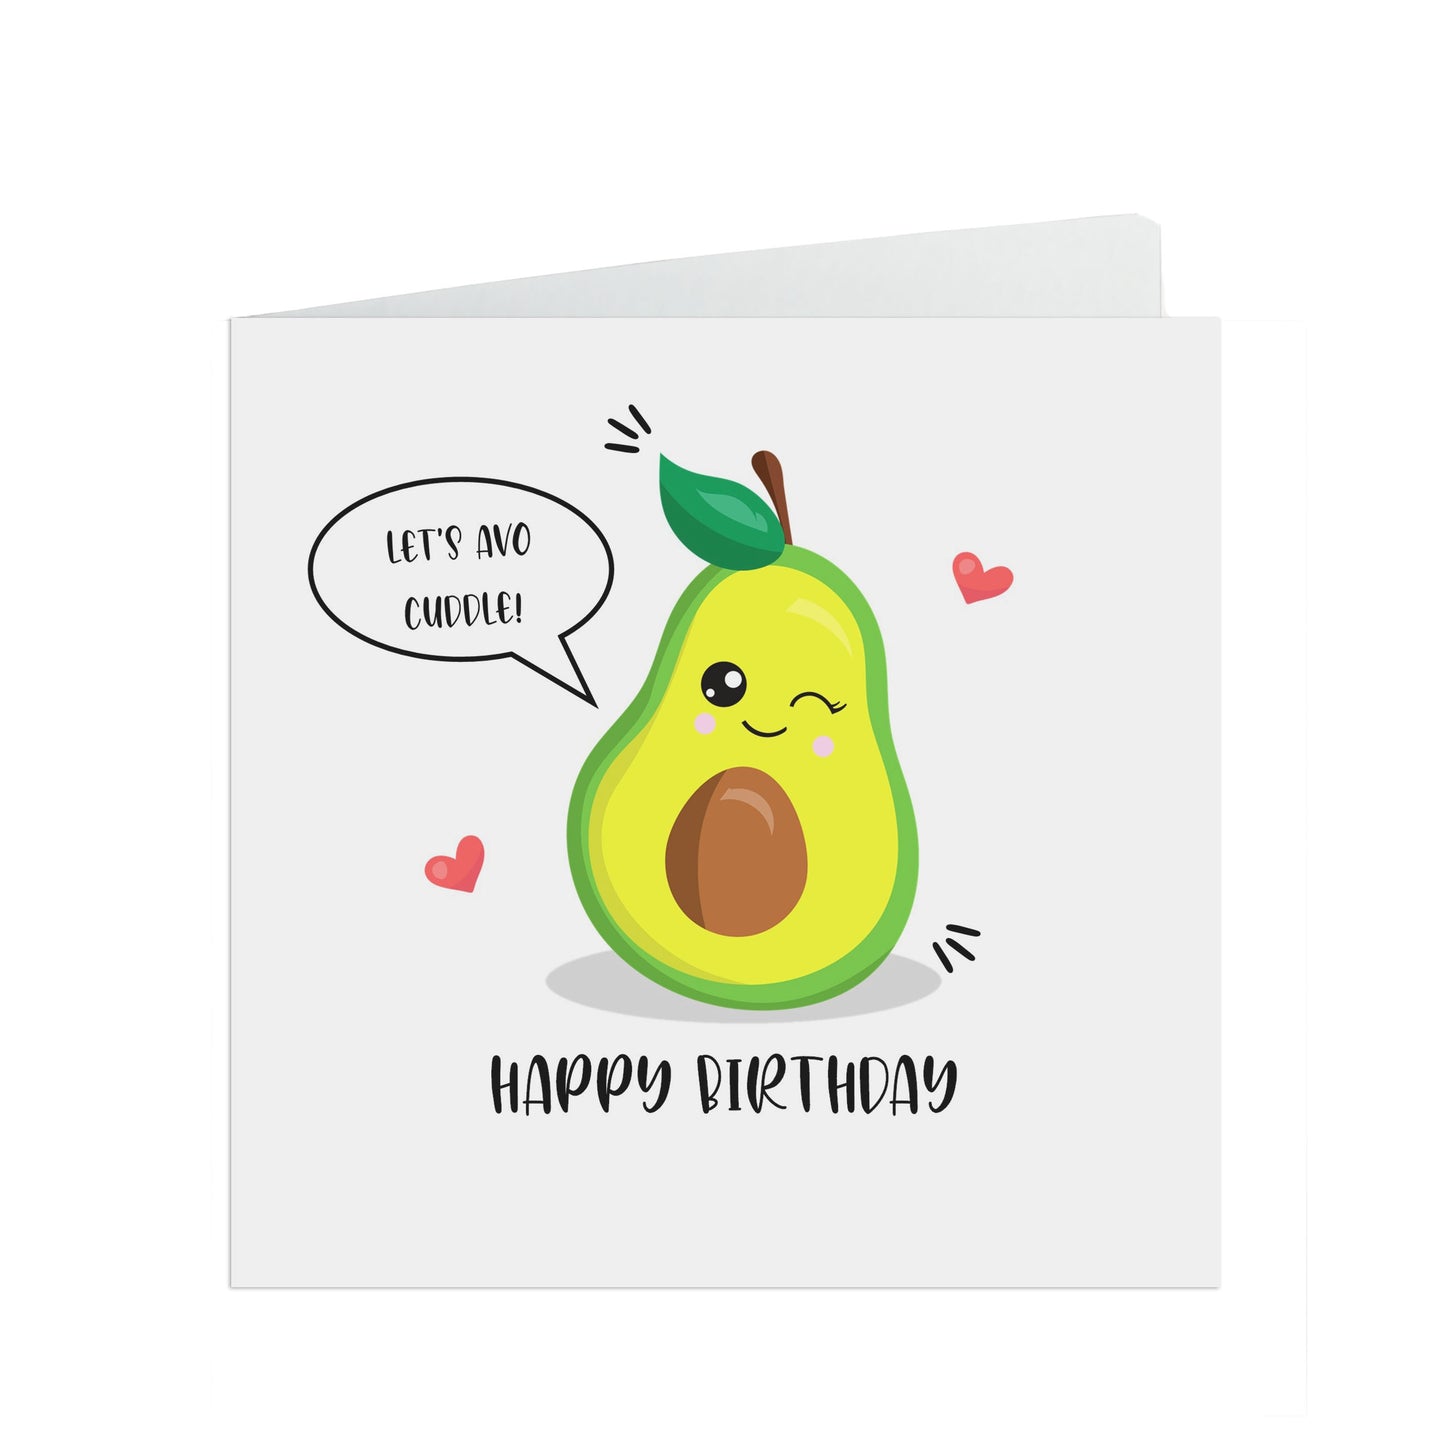 Let's Avo Cuddle! Funny Cheeky Couples Foodie Pun Birthday Card